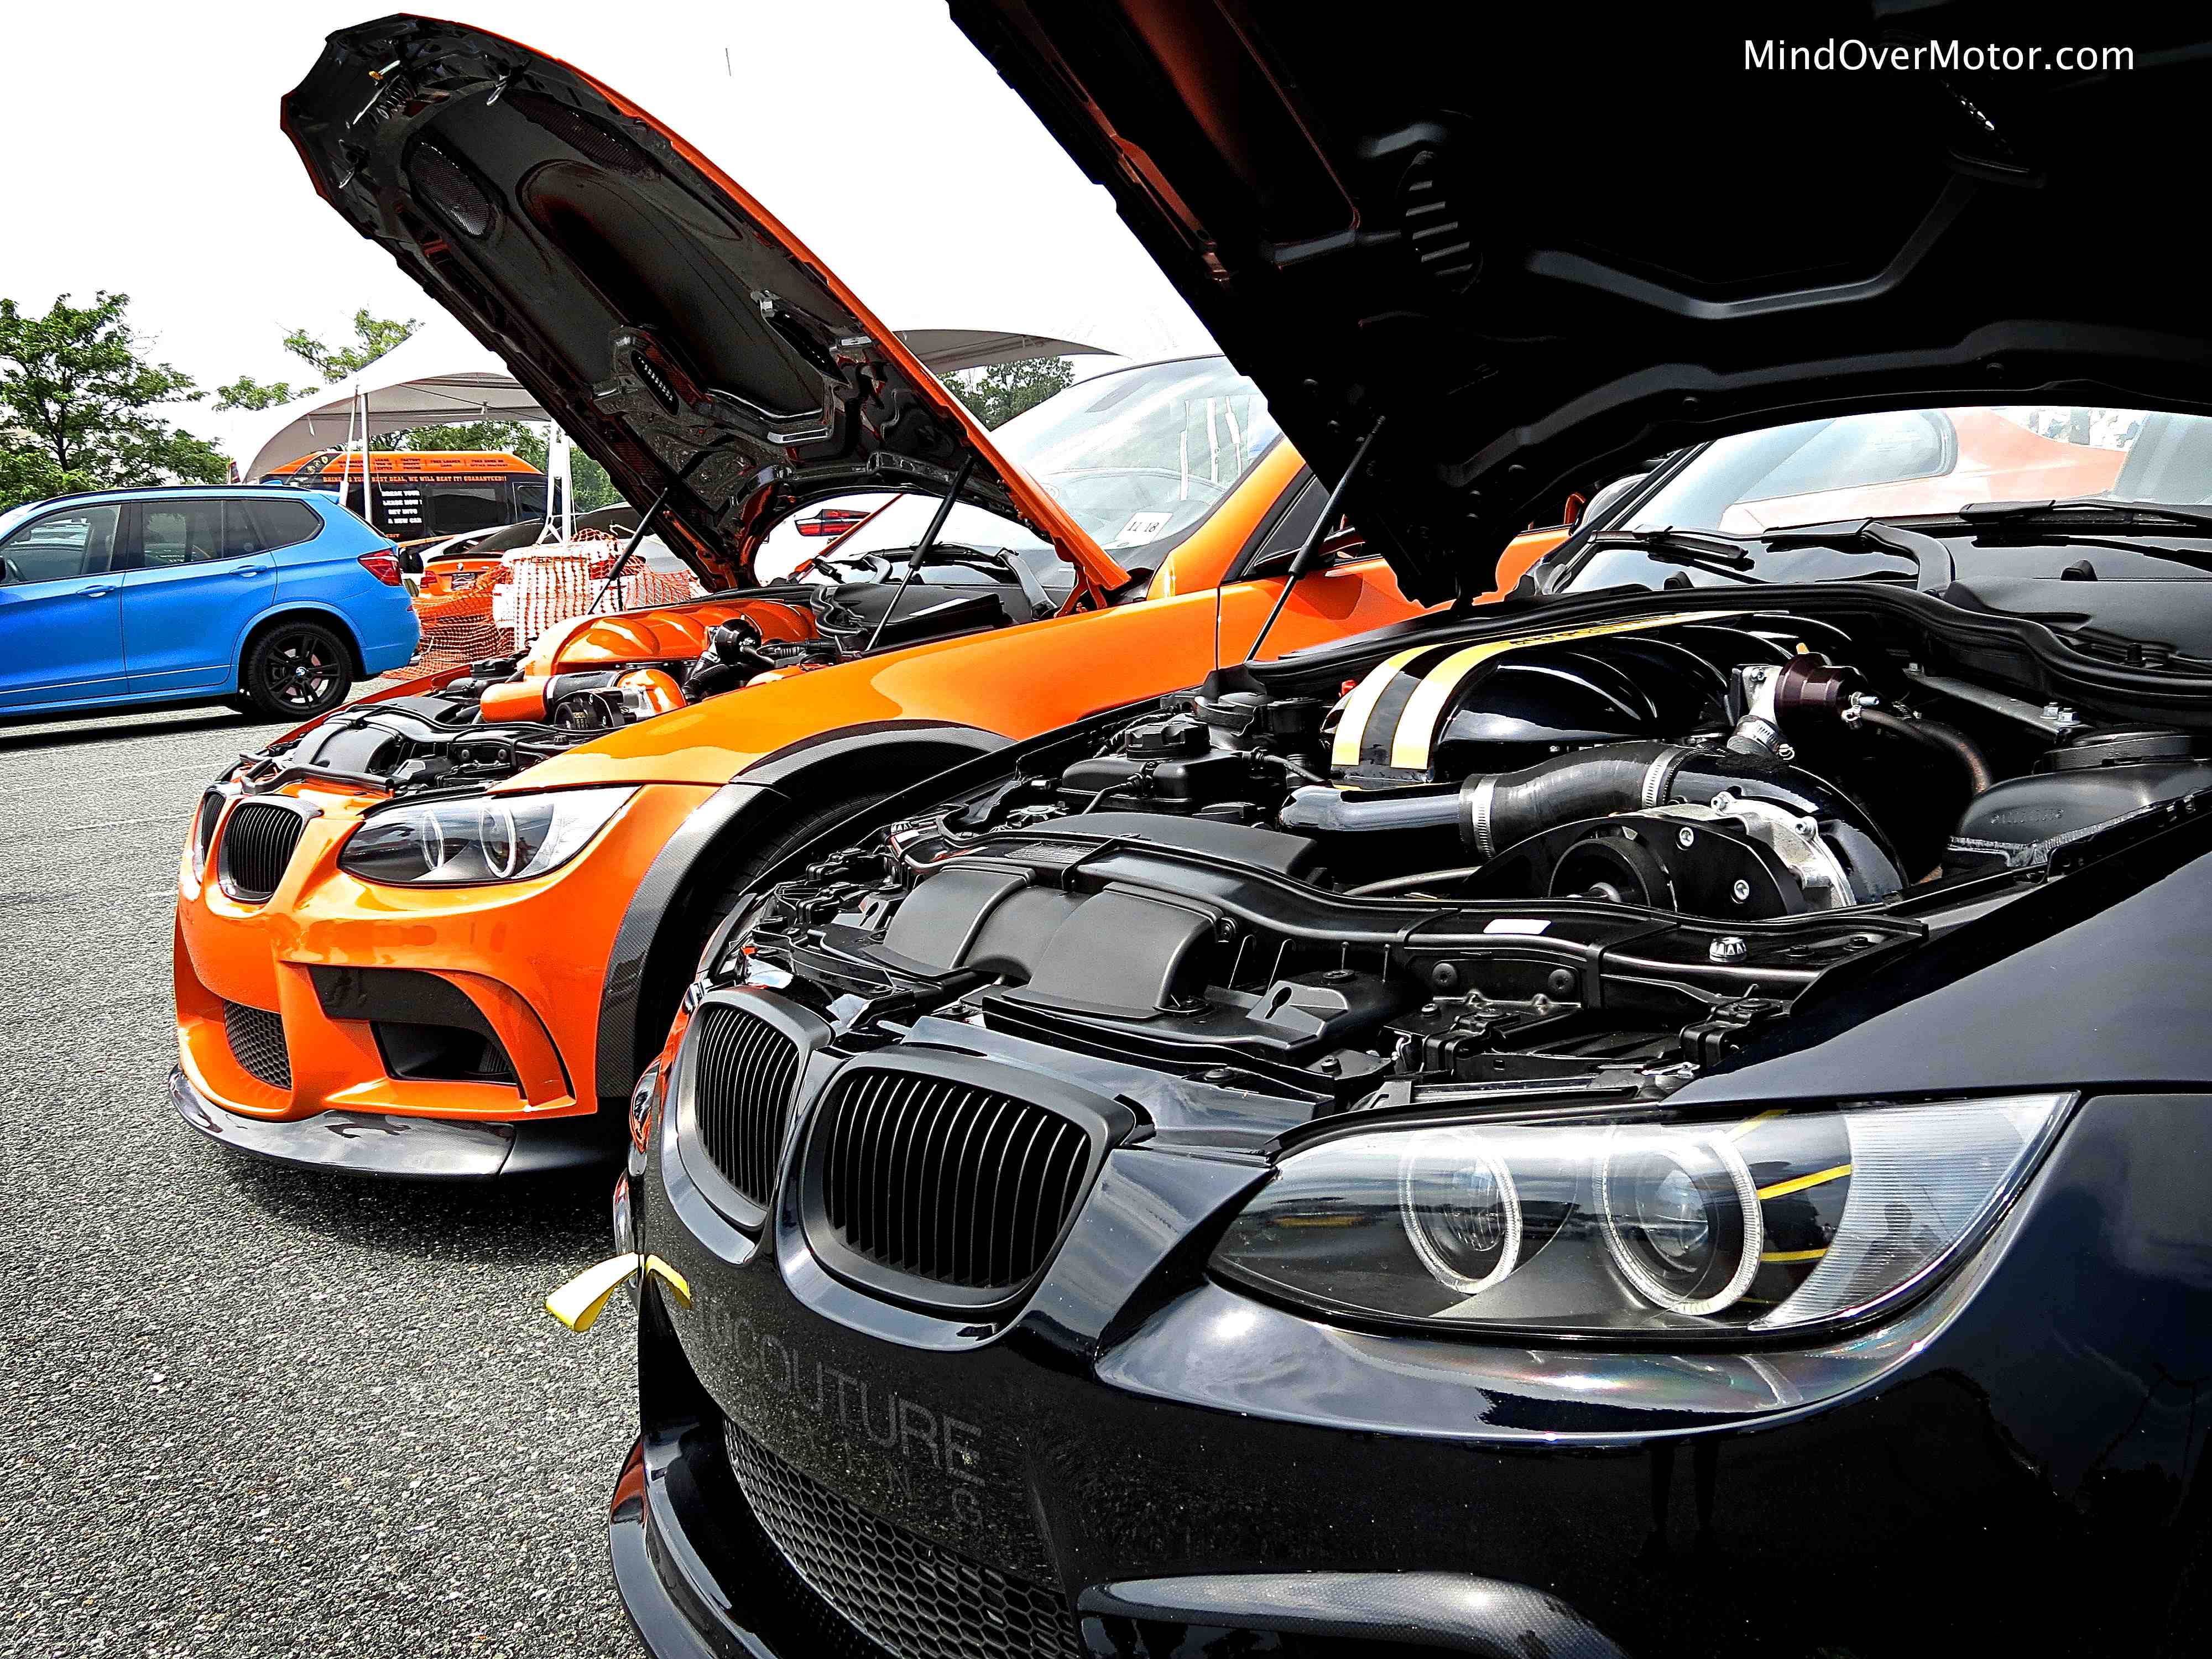 Supercharged BMW M3s